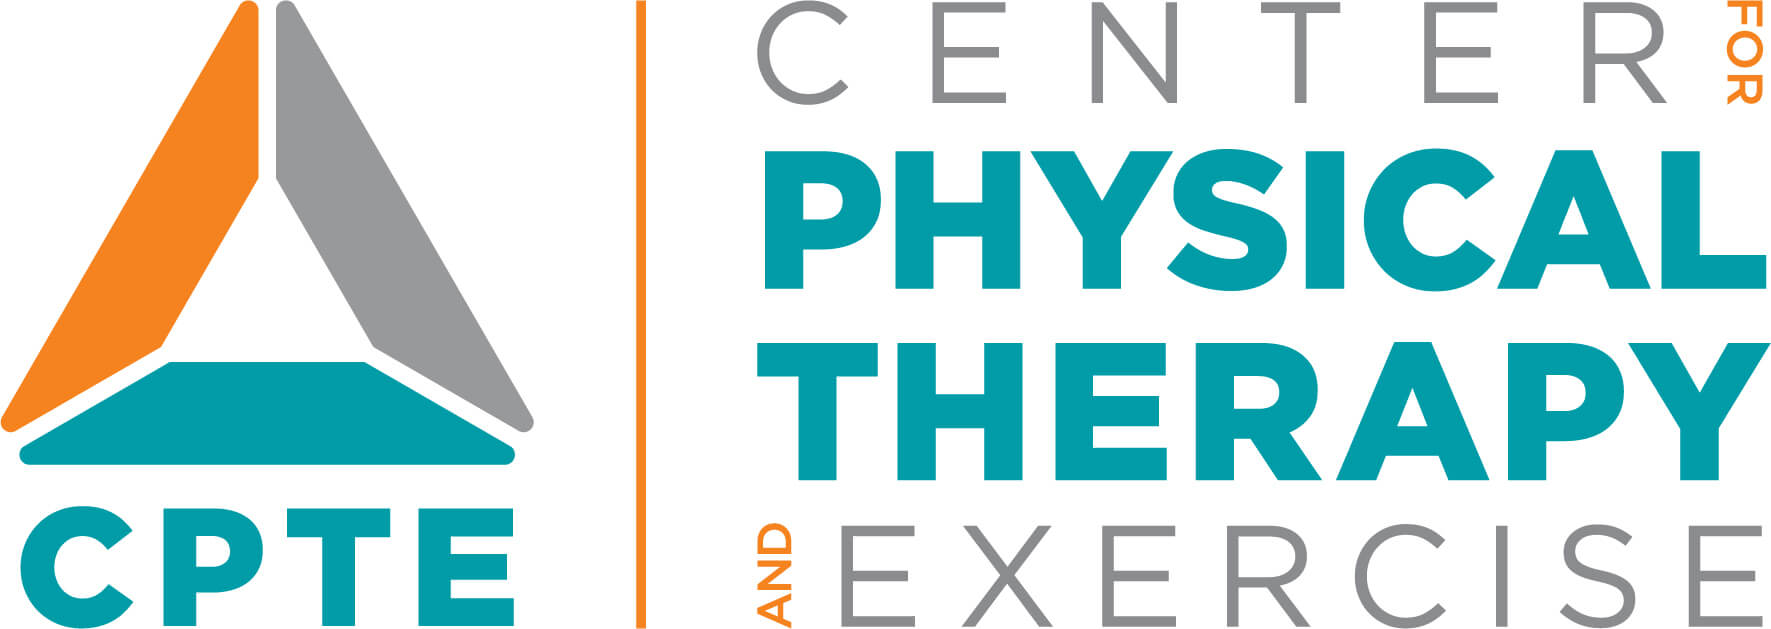 Center for Physical Therapy and Exercise